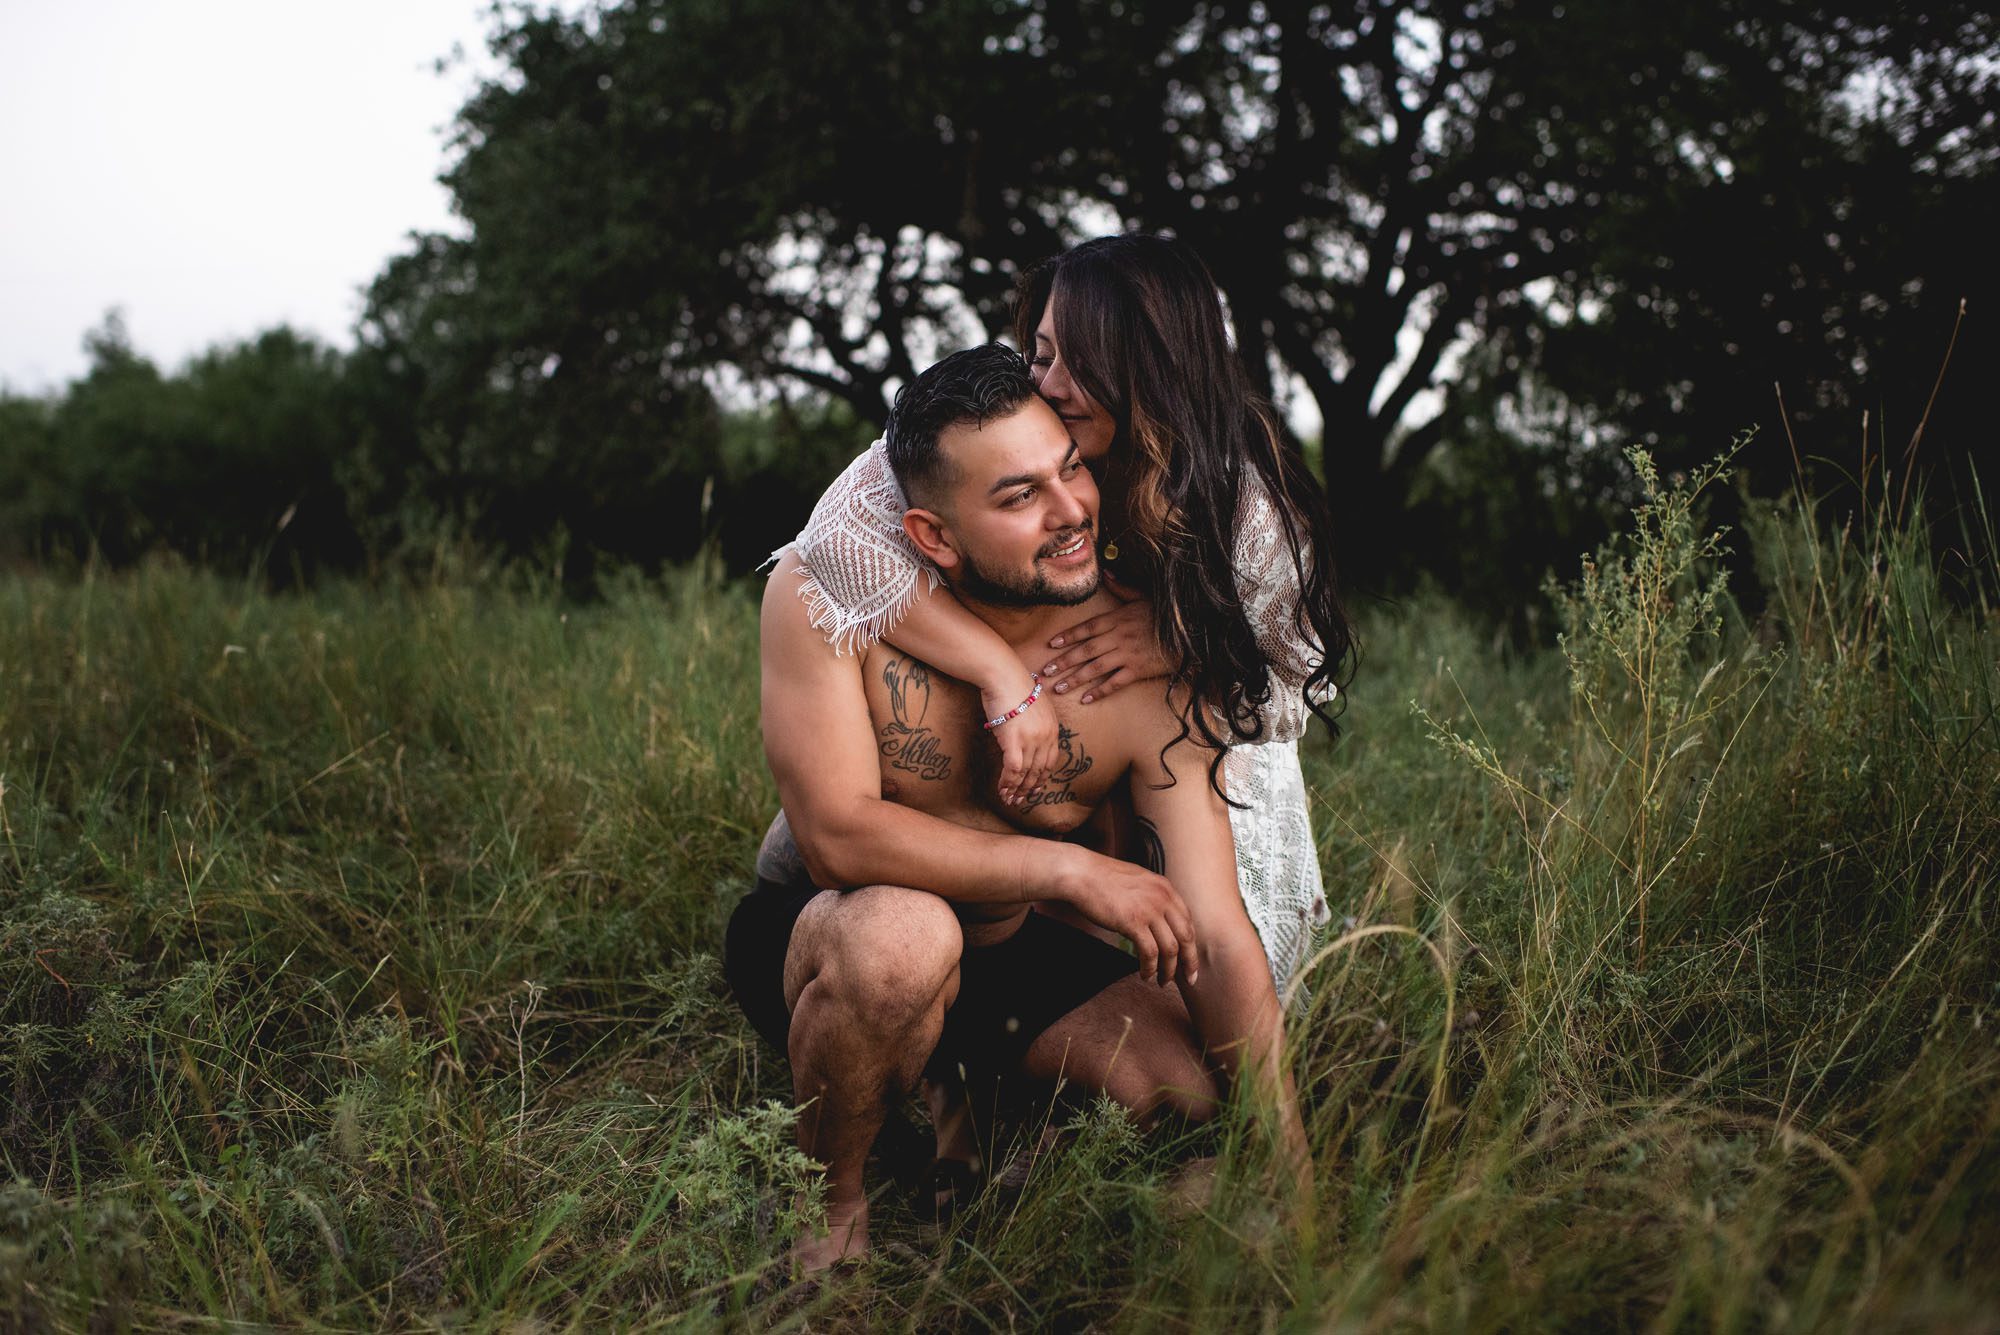 San Antonio Maternity Photographer, Couple snuggling together in a grassy field